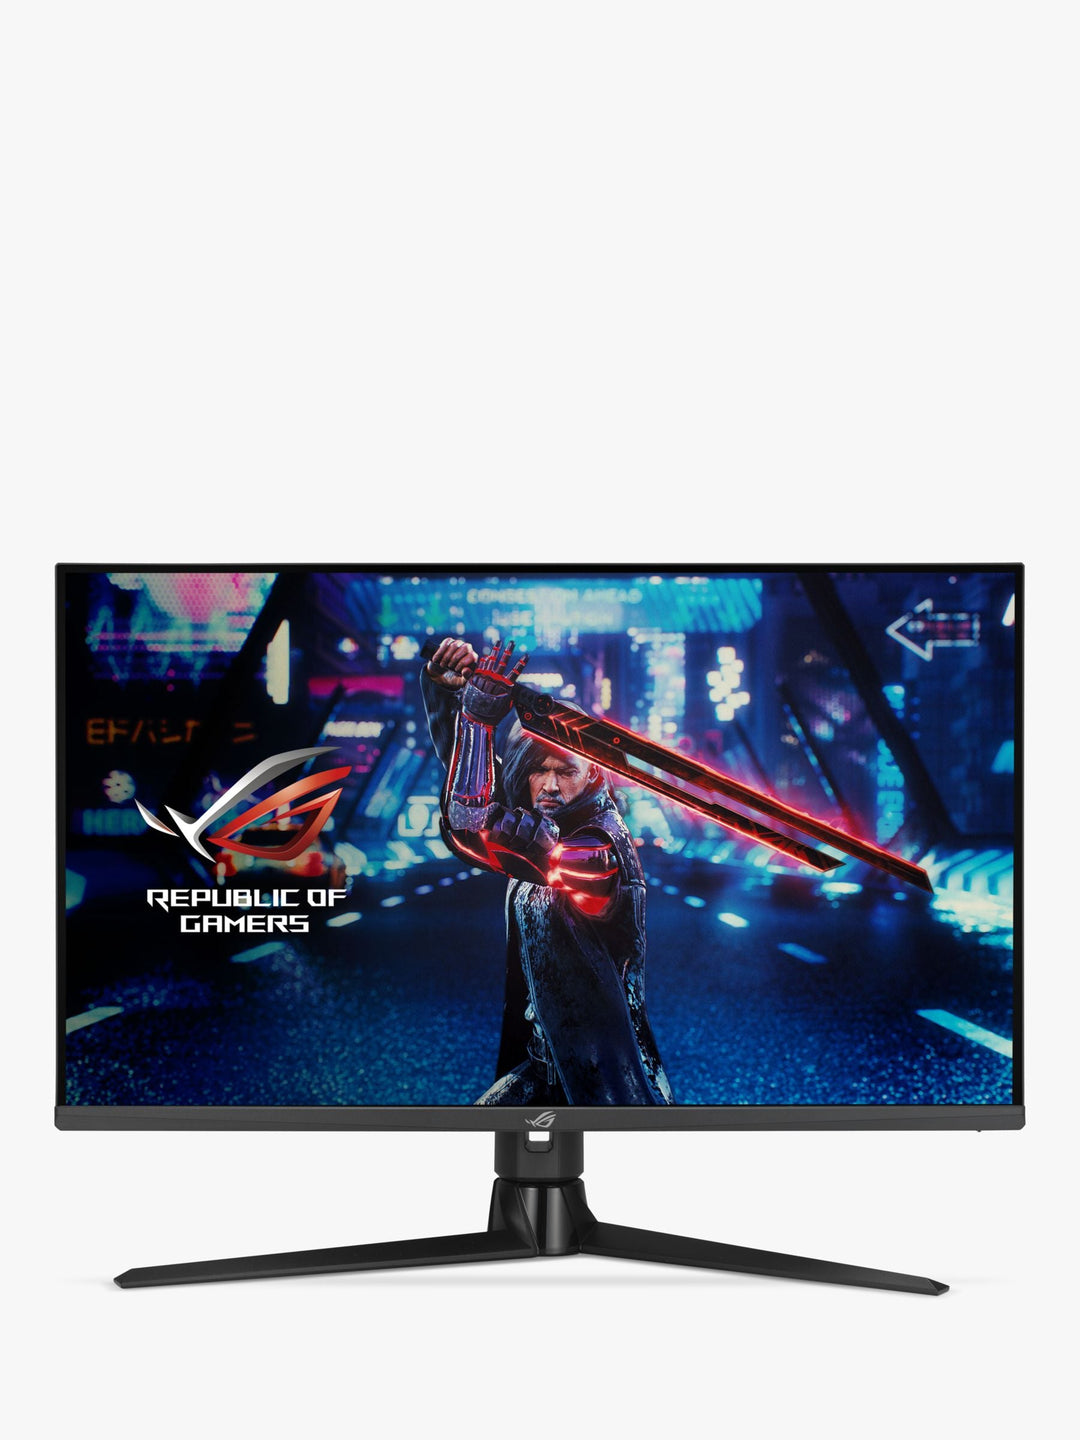 ASUS 4K UHD Gaming Monitor 32" 160Hz Refresh Rate, AMD Freesync, Adjustable Stand, HDMI DisplayPort, Low Motion Blur Technology